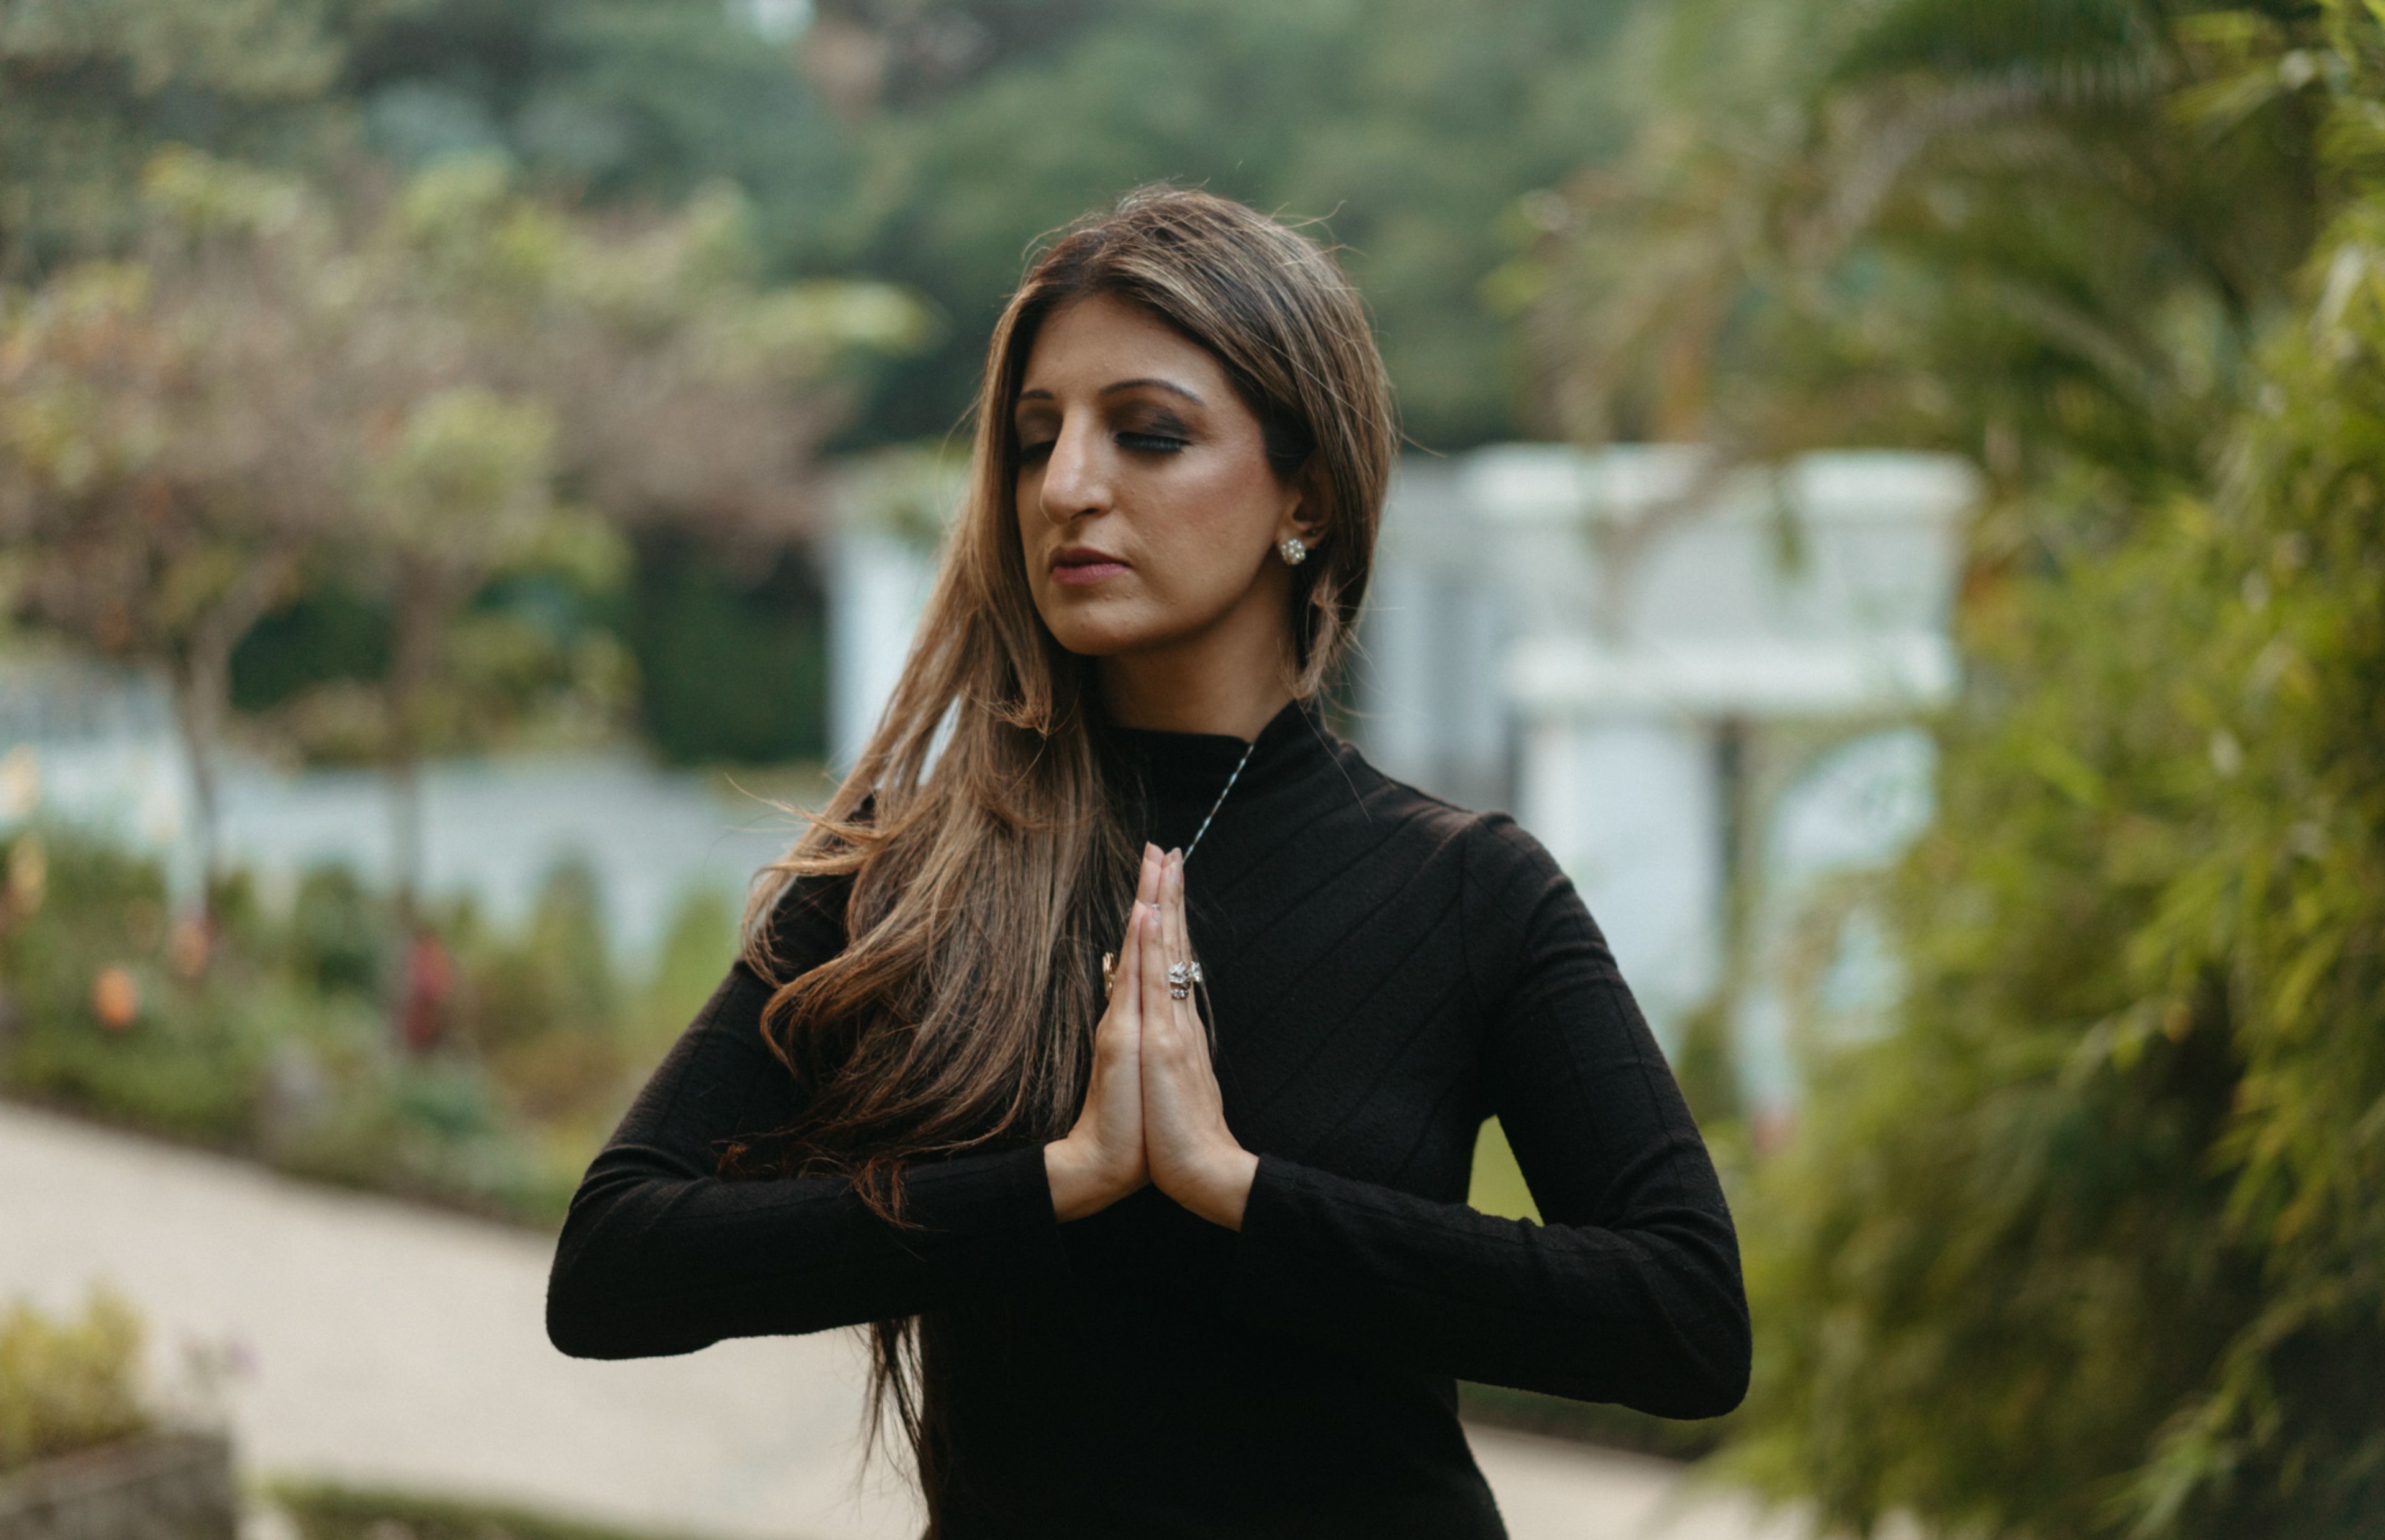 Woman with long hair in black top with hands together in prayer pose in front of her chest, looking peaceful with eyes closed